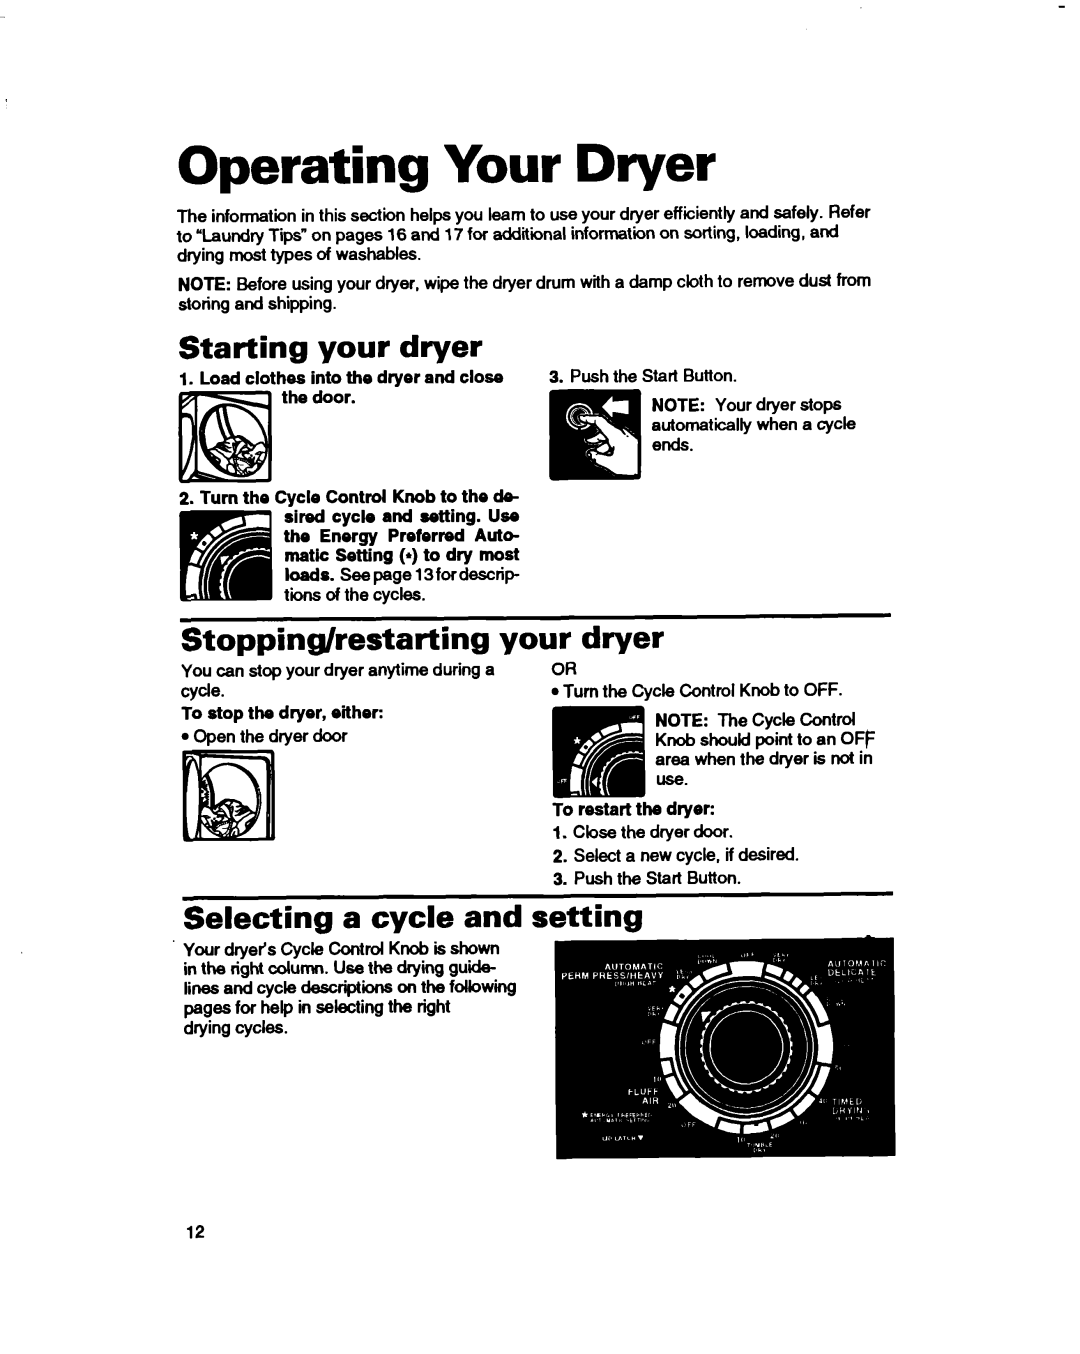 Whirlpool 3396314 Operating Your Dryer, Starting your dryer, Stopping/restarting your dryer, To stop the dryer, either 